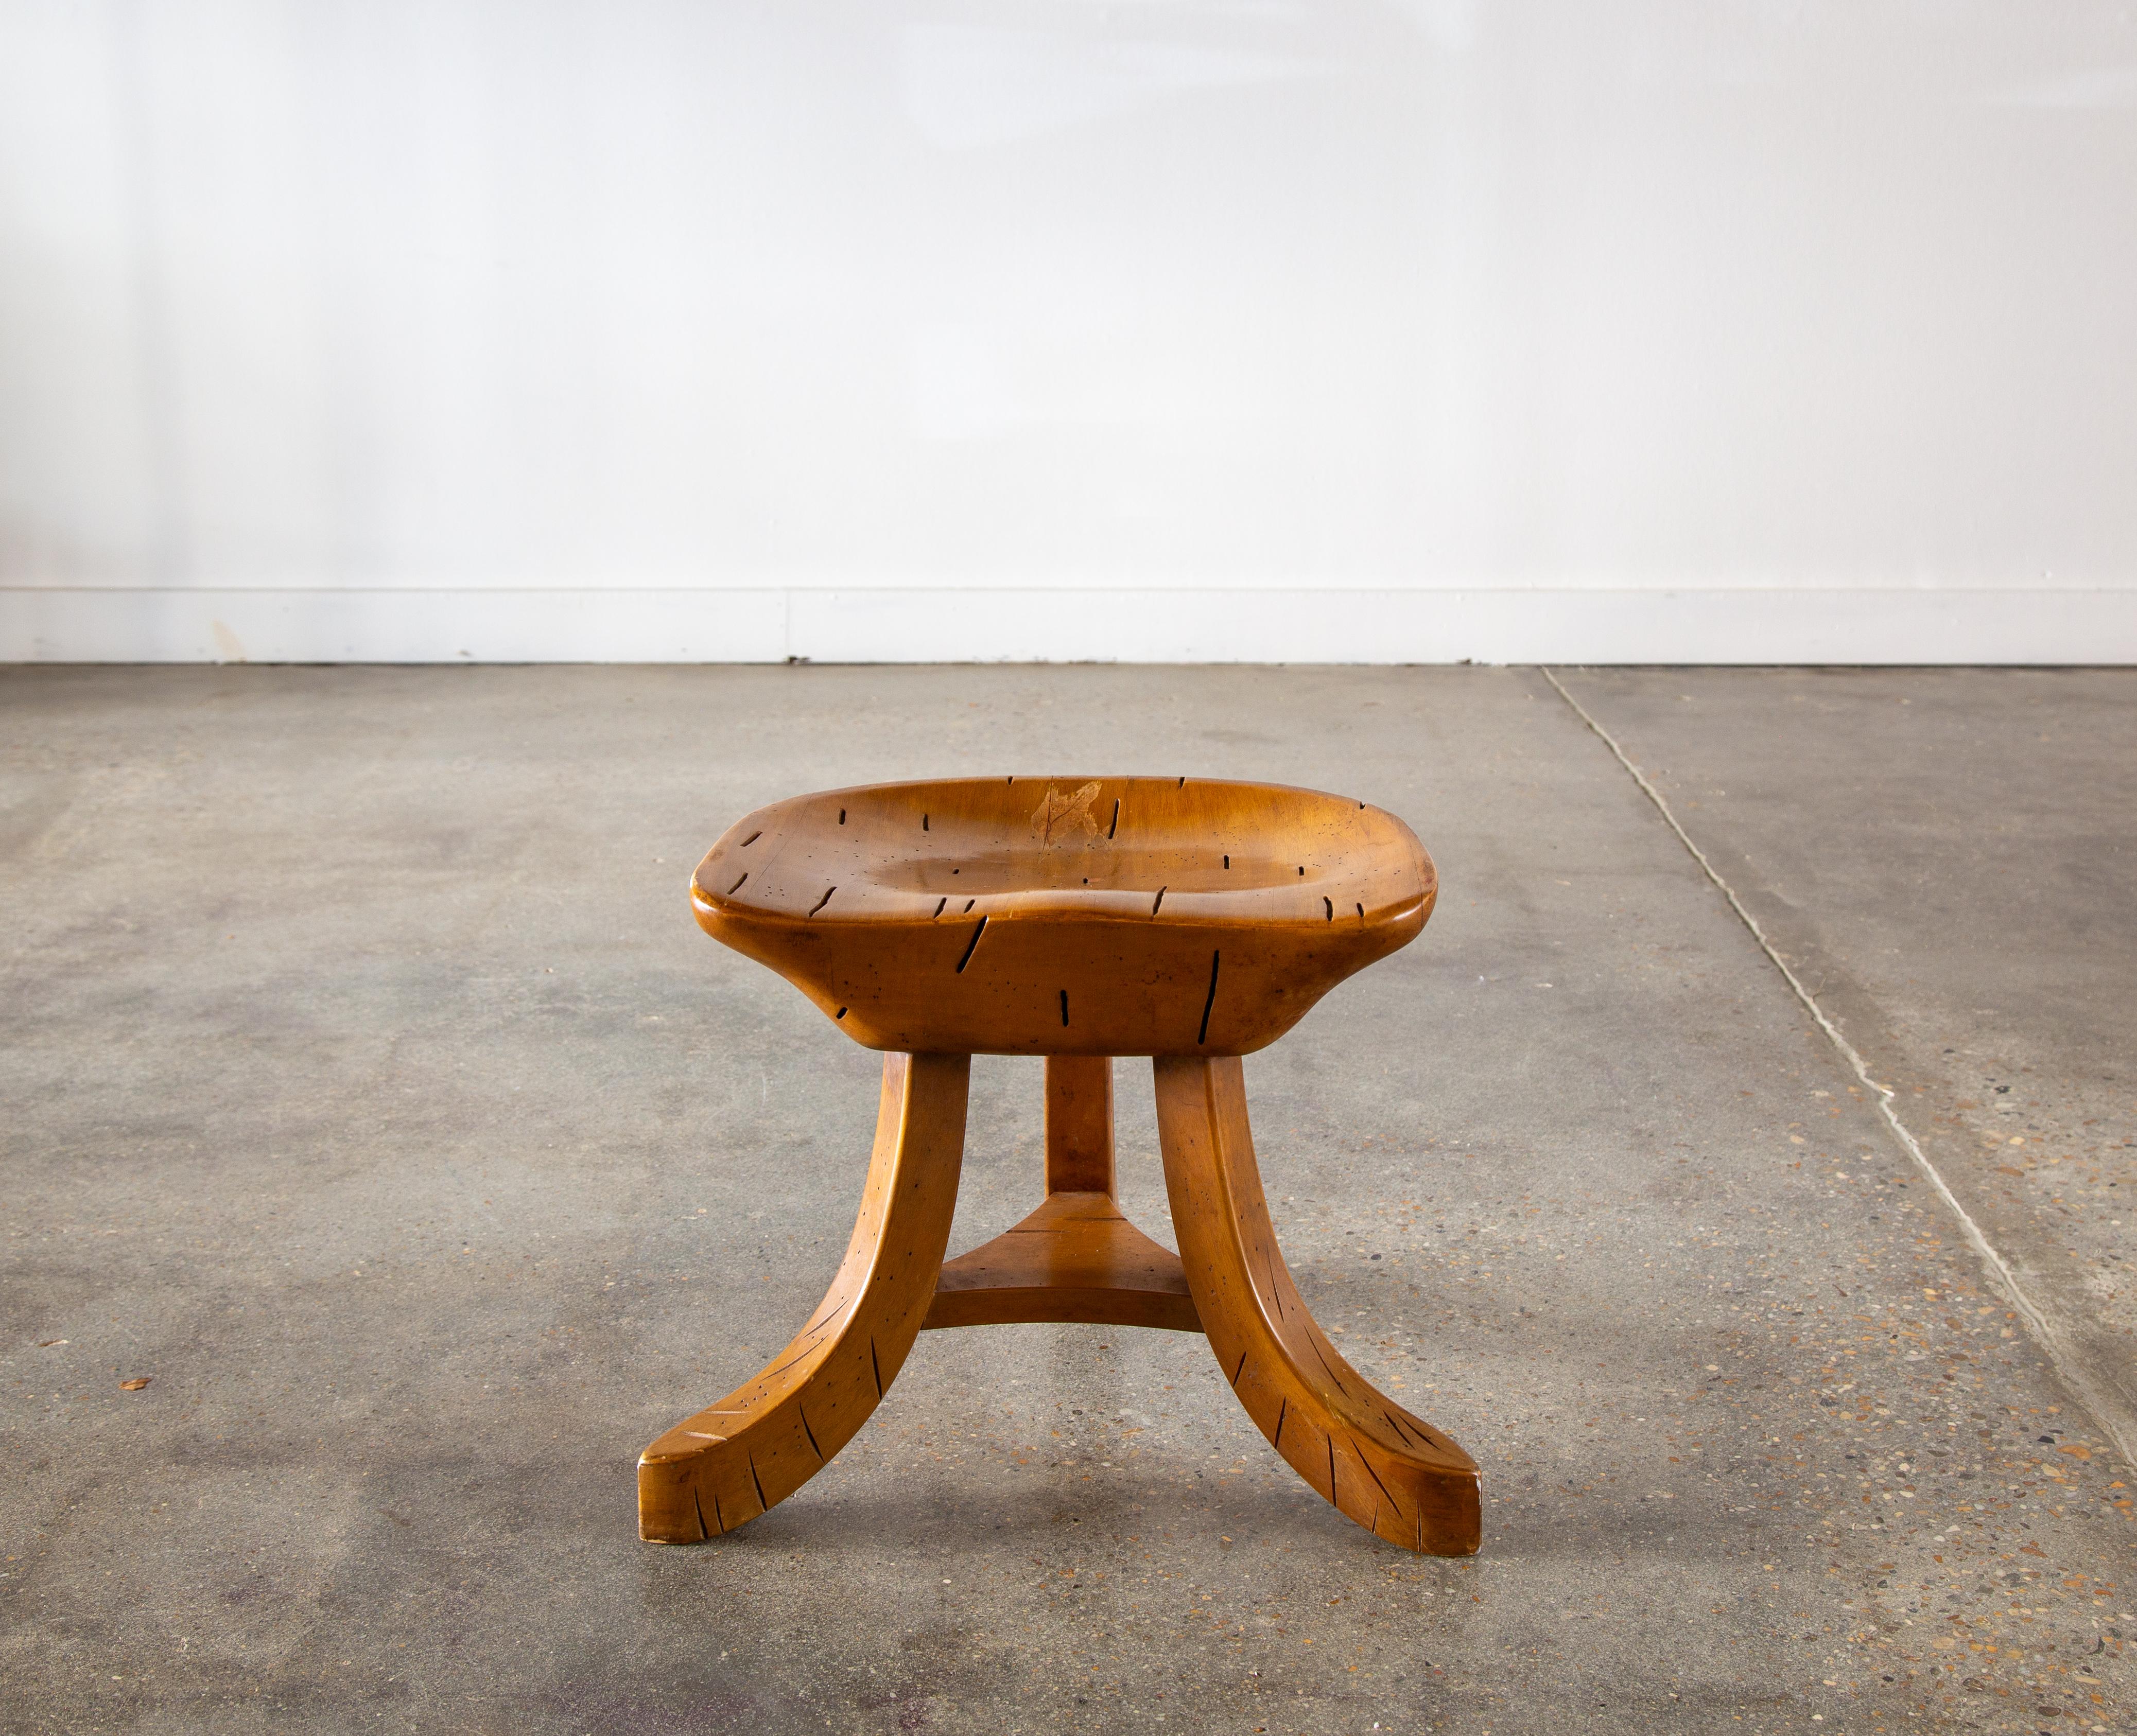 1966 Madison Park Ambrosia Maple Thebes style stool Adolf Loos In Good Condition For Sale In Virginia Beach, VA